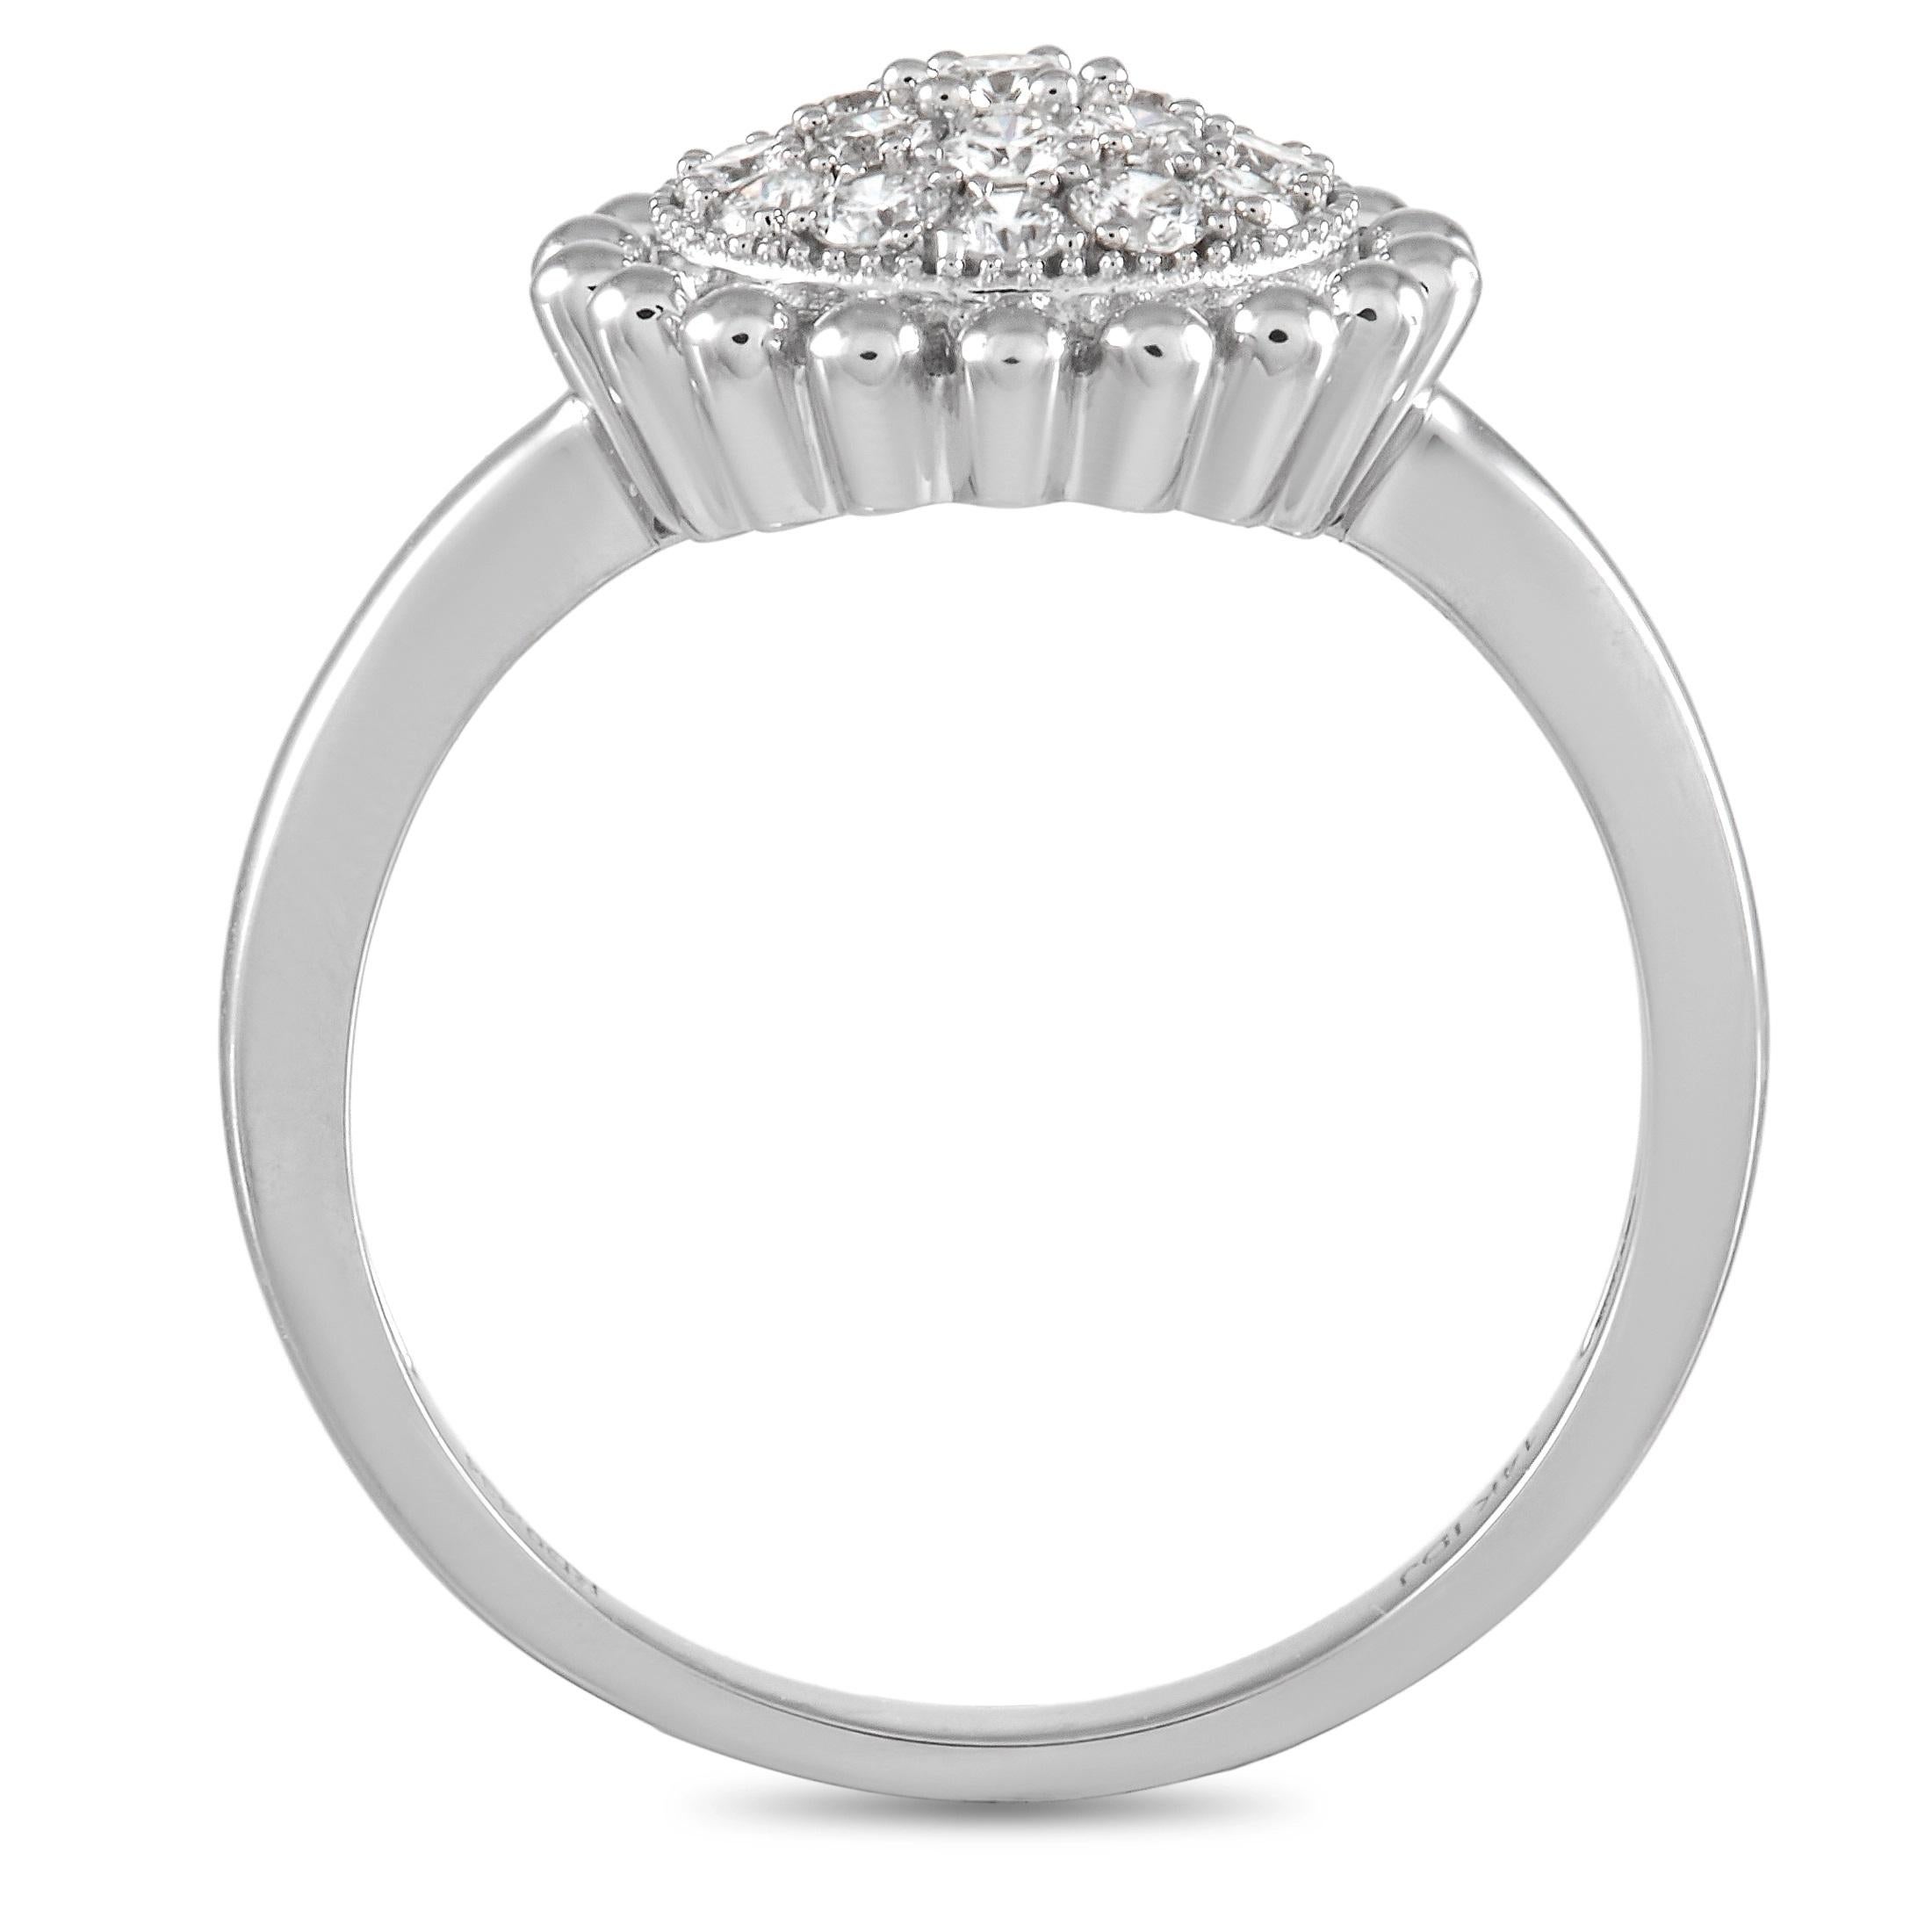 A sleek, modern 14K White Gold setting provides the perfect foundation for this dynamic luxury ring. At the center, a cluster of round-cut diamonds totaling 0.45 carats make this piece sparkle every time it catches the light. With a 1mm wide band